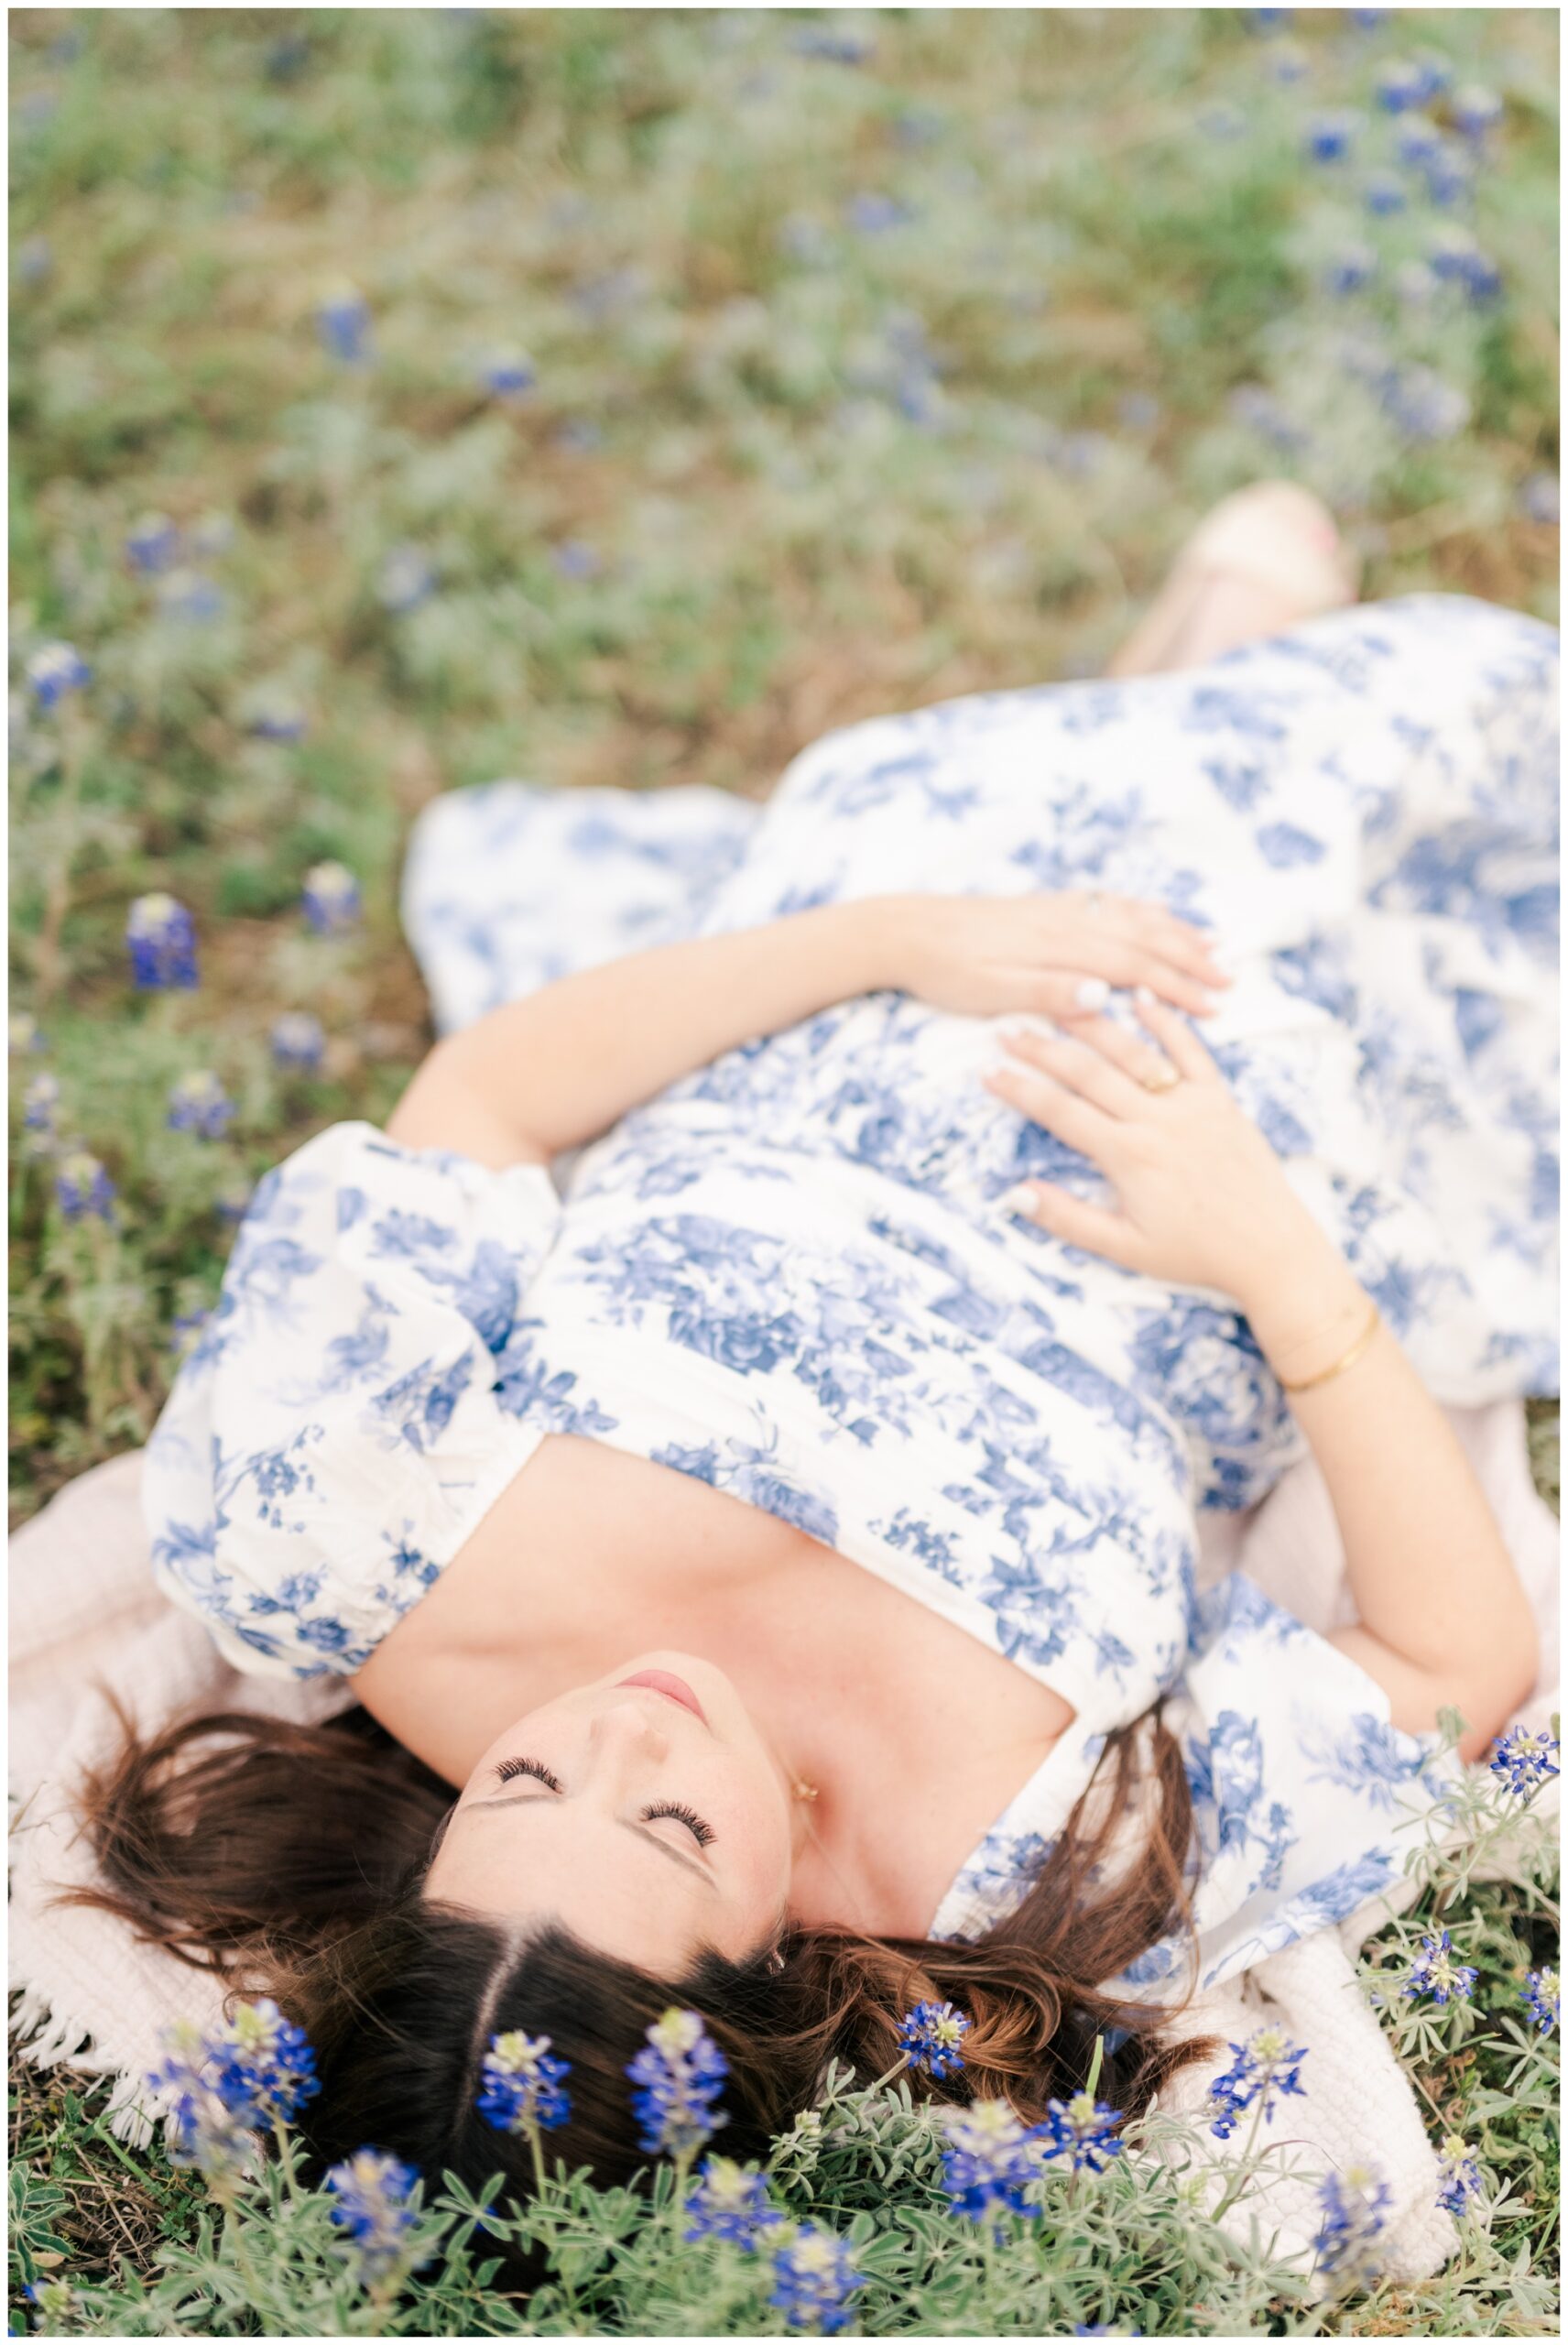 Maternity Photography in the Bluebonnets. 